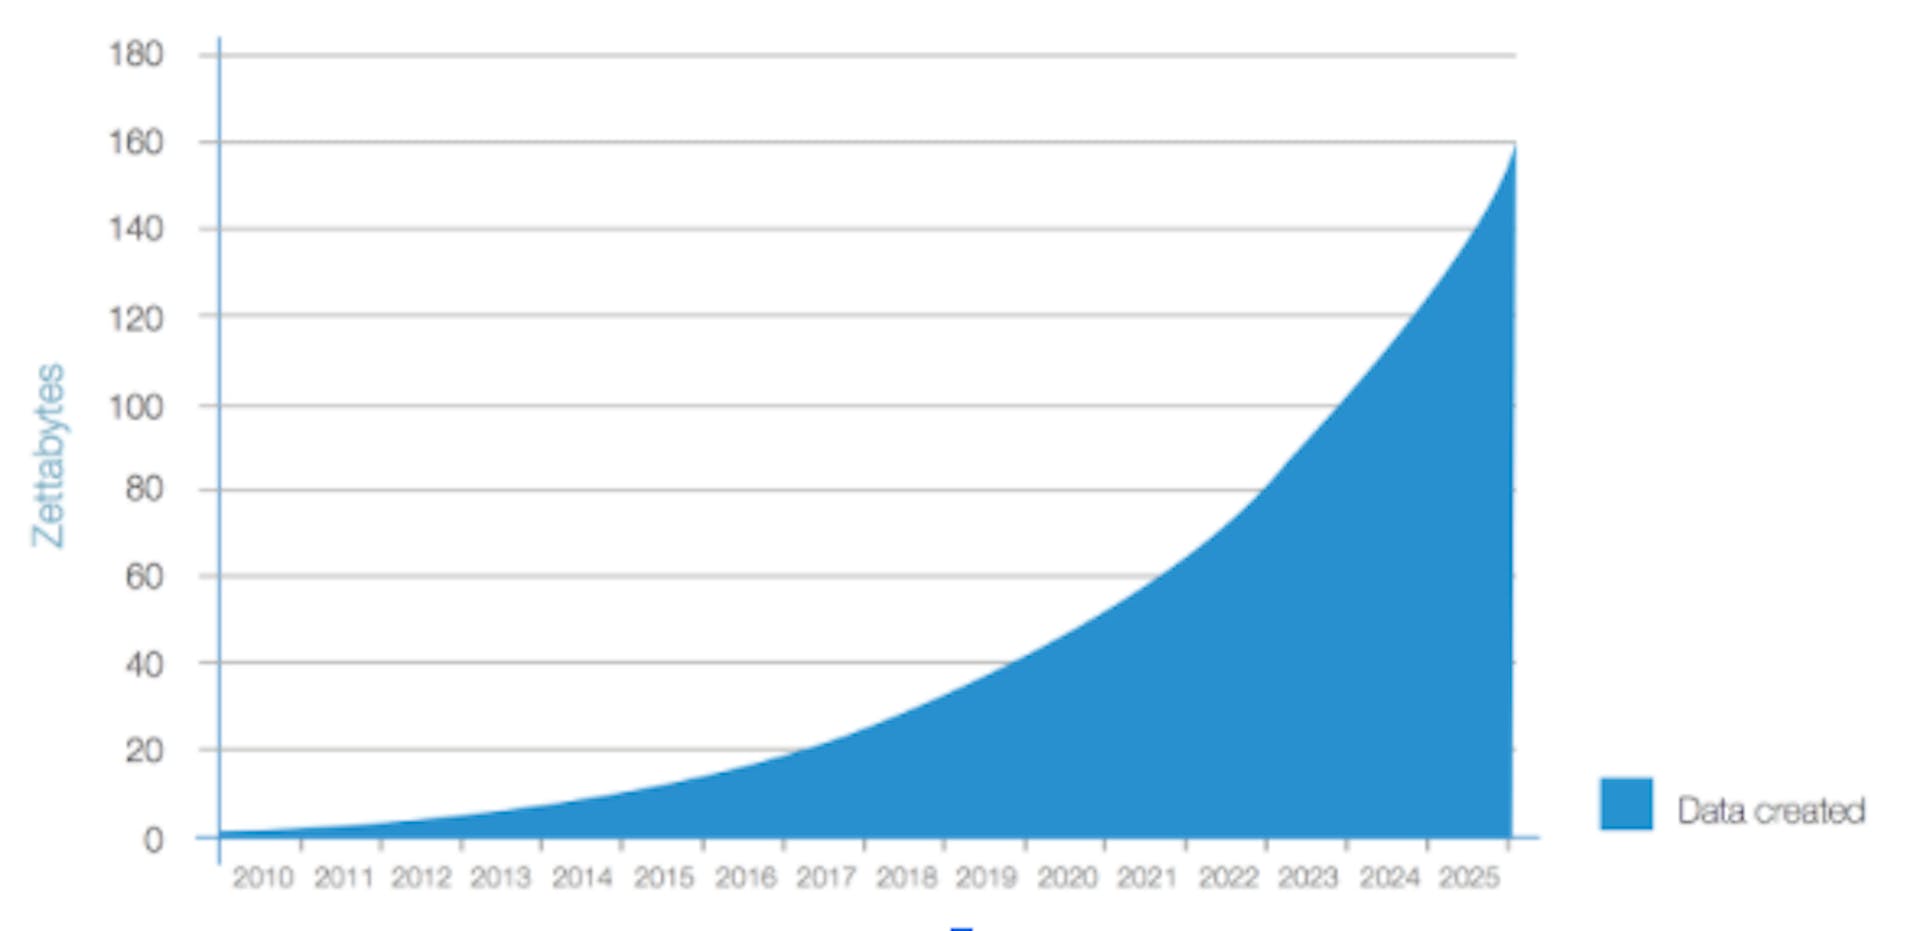 Chart-showing-big-data-becoming-huge-data-by-2025.-Data-created-in-zettabytes-from 2010 to 2025 (estimated) 